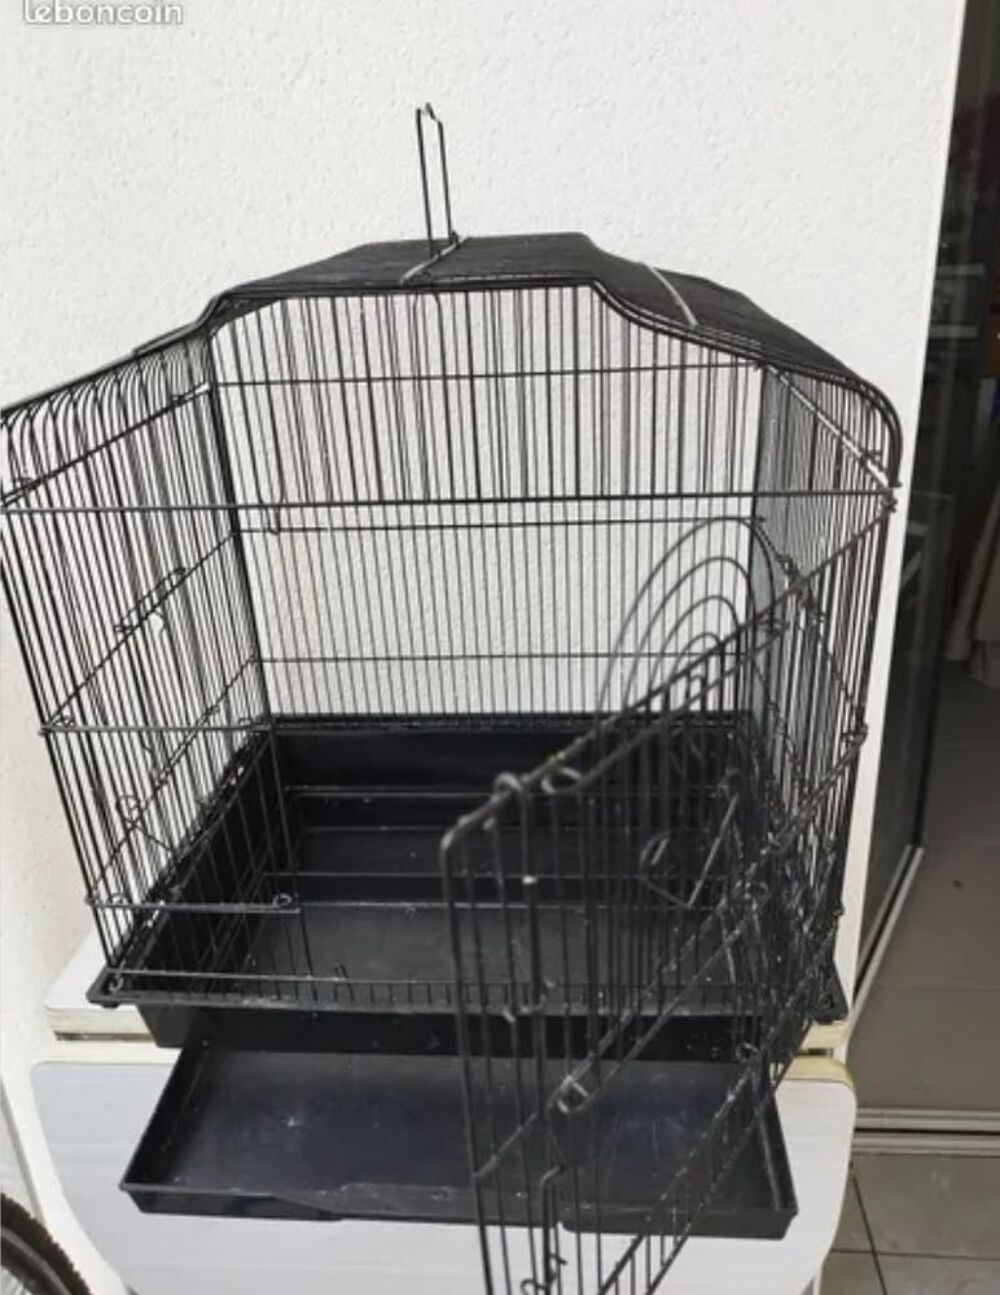   Petite cage d'appoint  